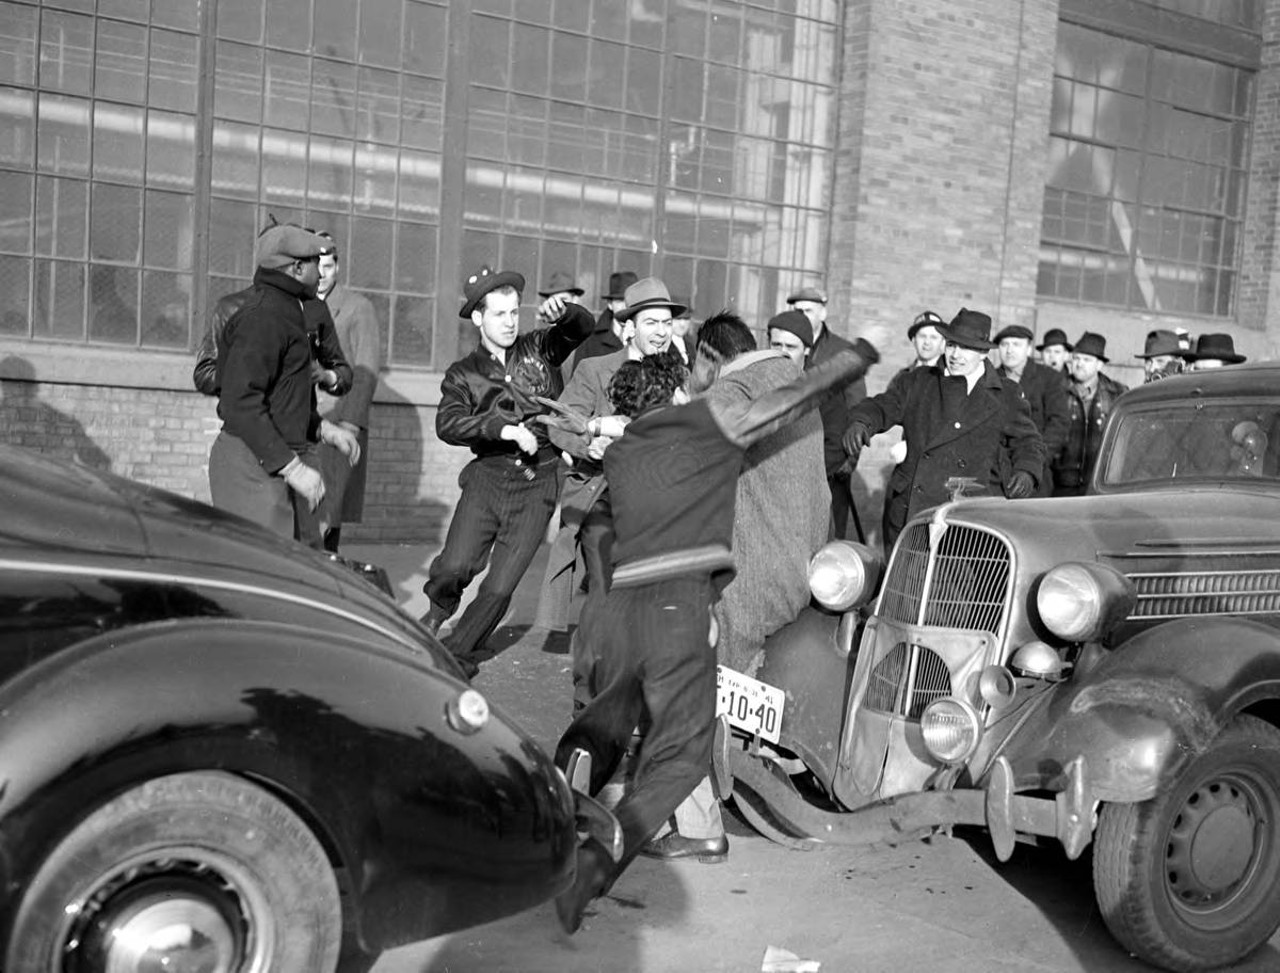 
April 3, 1941:  Violence broke out among automobile workers during the strike against Ford Motor Company. In response to union activity, Ford fired eight workers at the Ford plant. As word spread, 50,000 employees stopped working and the first Ford strike began on April 10. Henry Ford, with some reluctance, eventually consented to allow a vote on the matter of unionization. The workers overwhelmingly supported the formation of a union, and the UAW  drafted an agreement outlining the terms of engagement between the workers and the company. However, Ford initially refused to sign this agreement. It was only when Mrs. Ford intervened that a resolution was reached. Frustrated by the ongoing conflict and turmoil, she insisted that her husband sign the agreement and threatened to leave him if he didn't. Ford realized that his stubbornness would cost him a lot more than money, so Ford and the workers signed the agreement and the triumphant Ford employees returned to work.